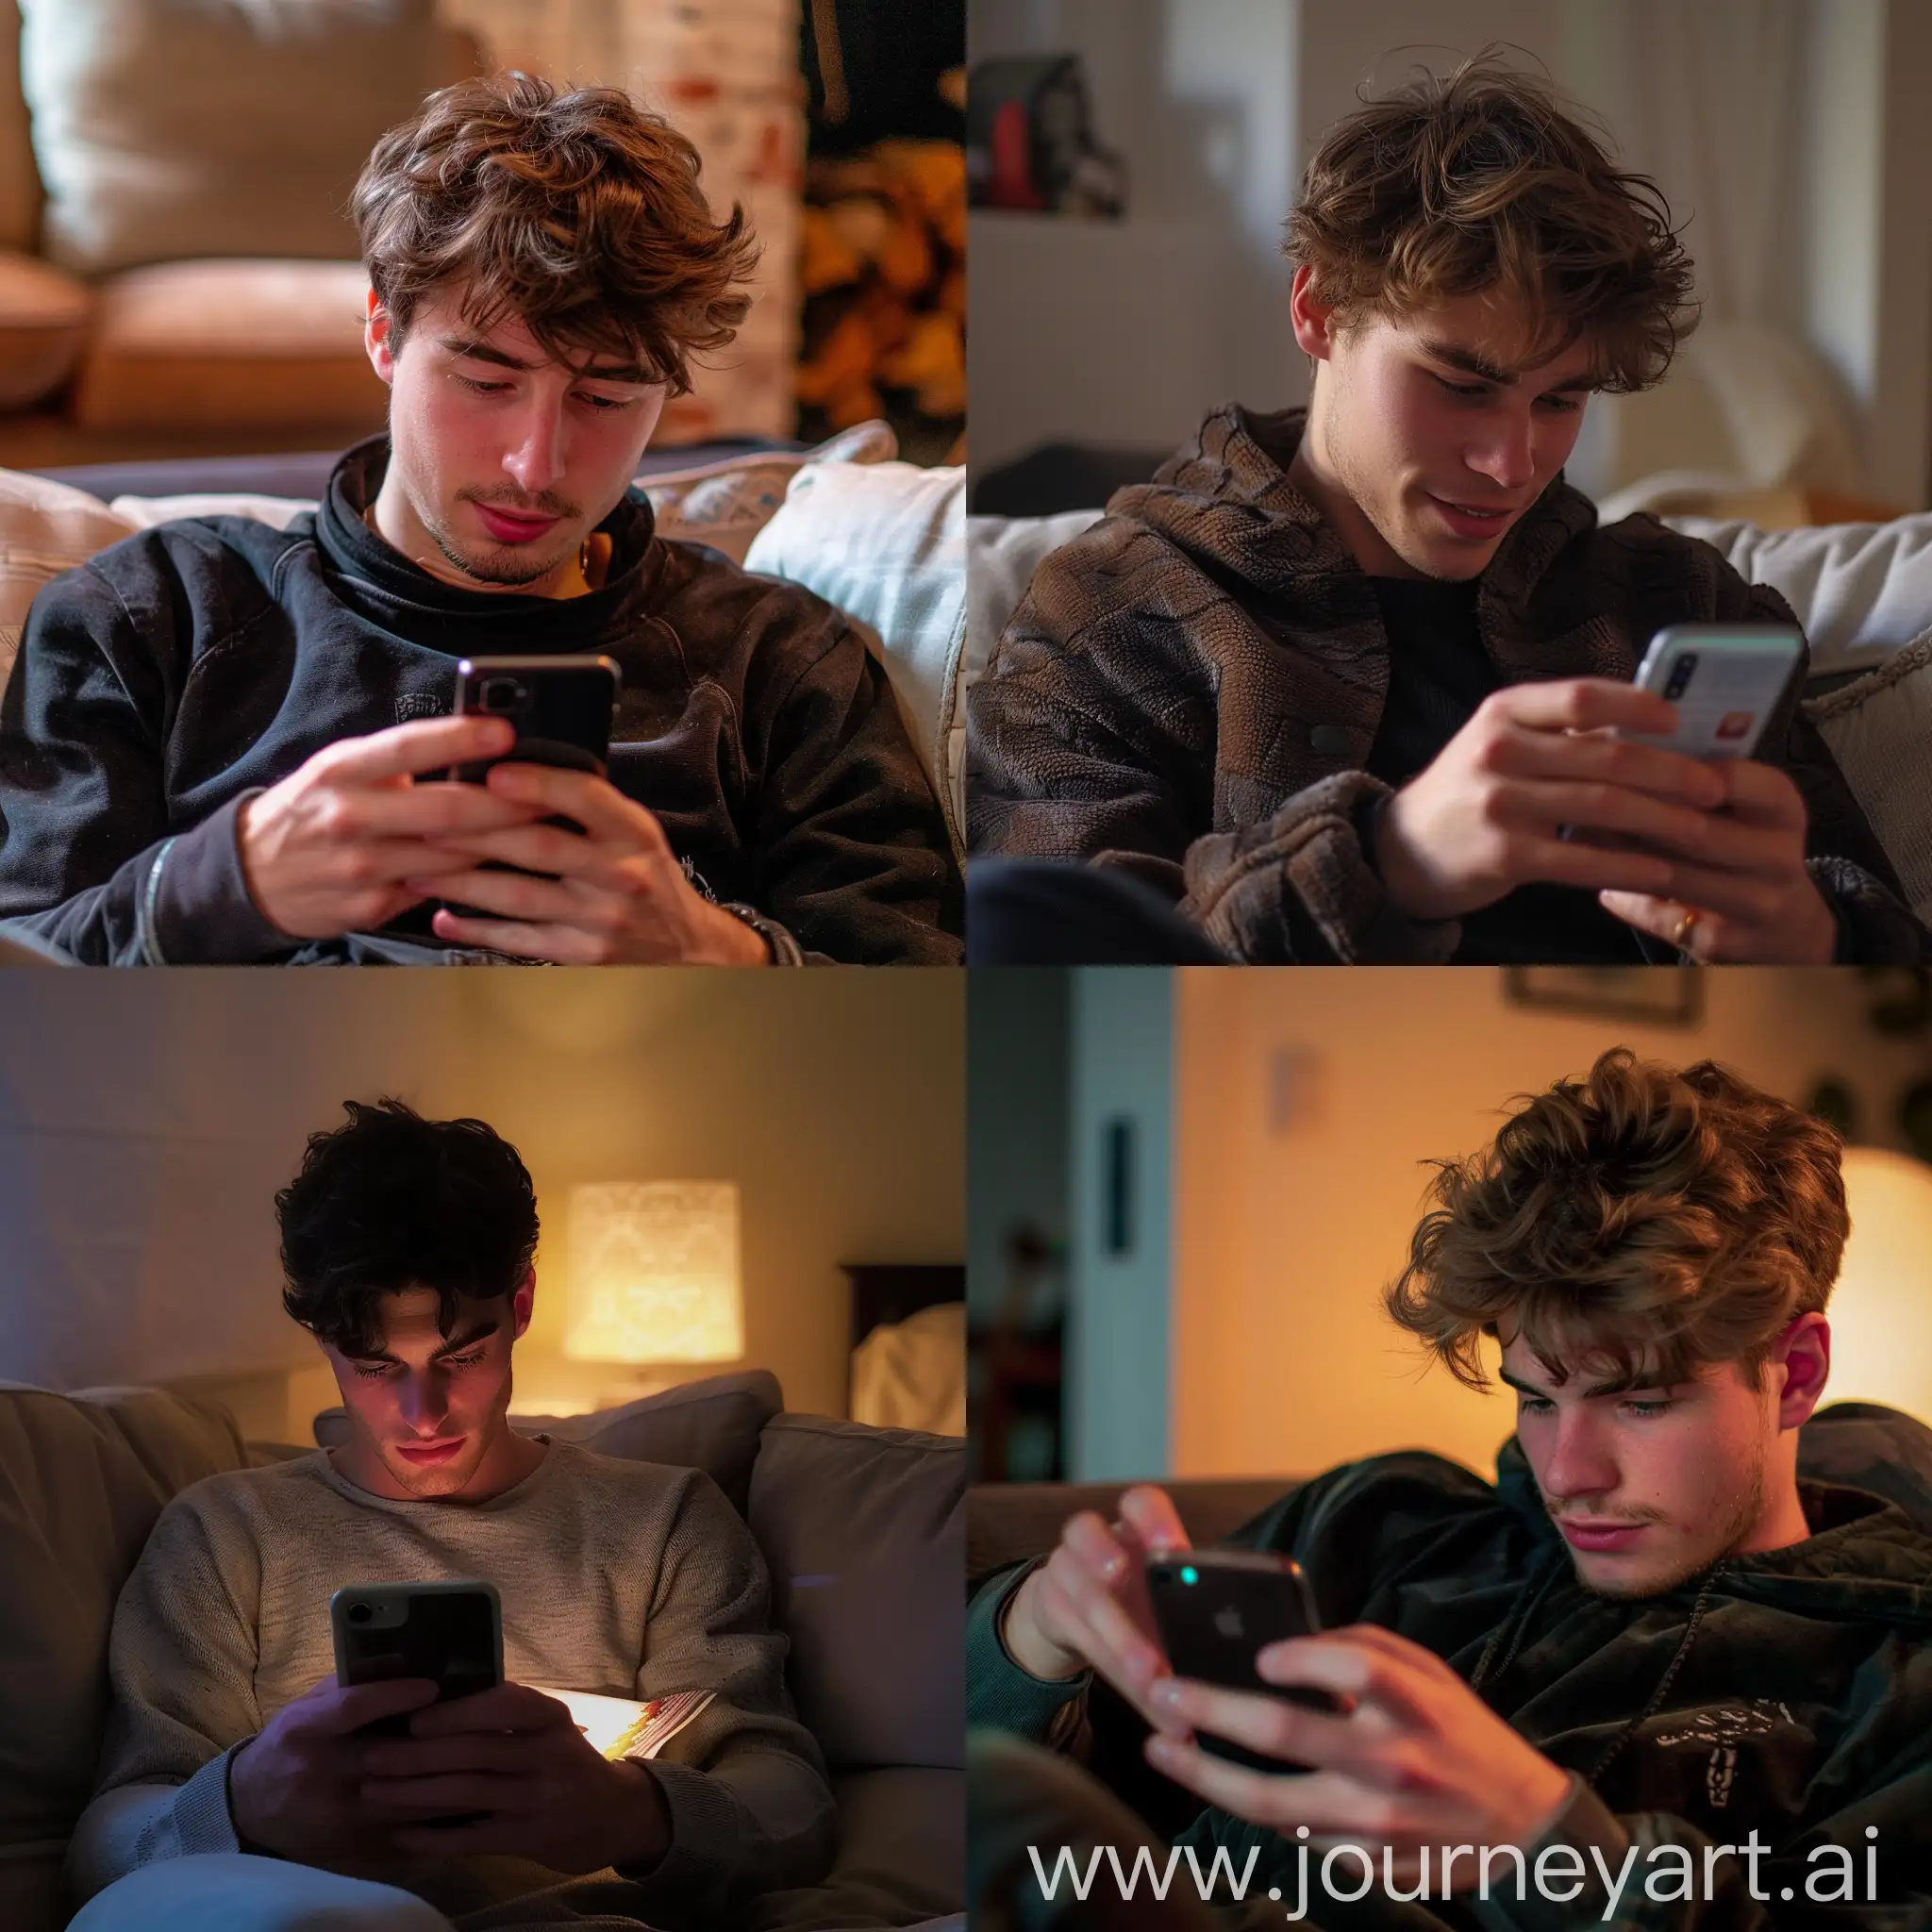 Charismatic-Young-Man-Discovers-Surprising-News-on-iPhone-with-a-Subdued-Smile